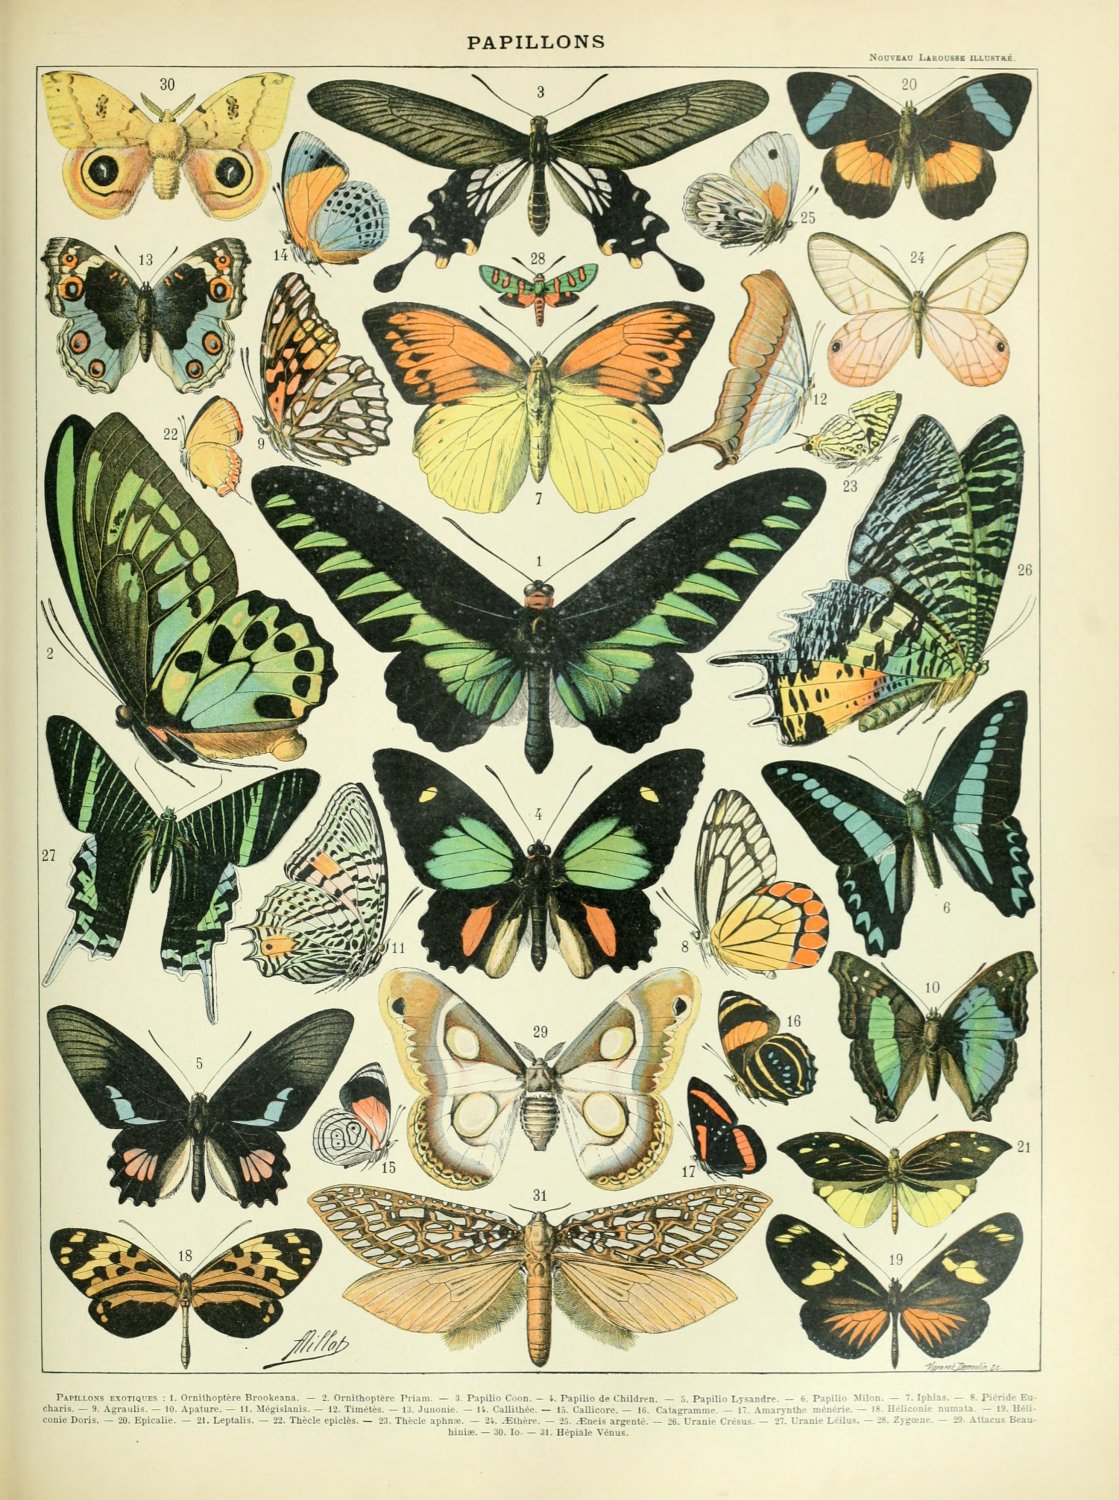 Different Types of Butterflies Chart 13"x19" (32cm/49cm) Polyester Fabric Poster